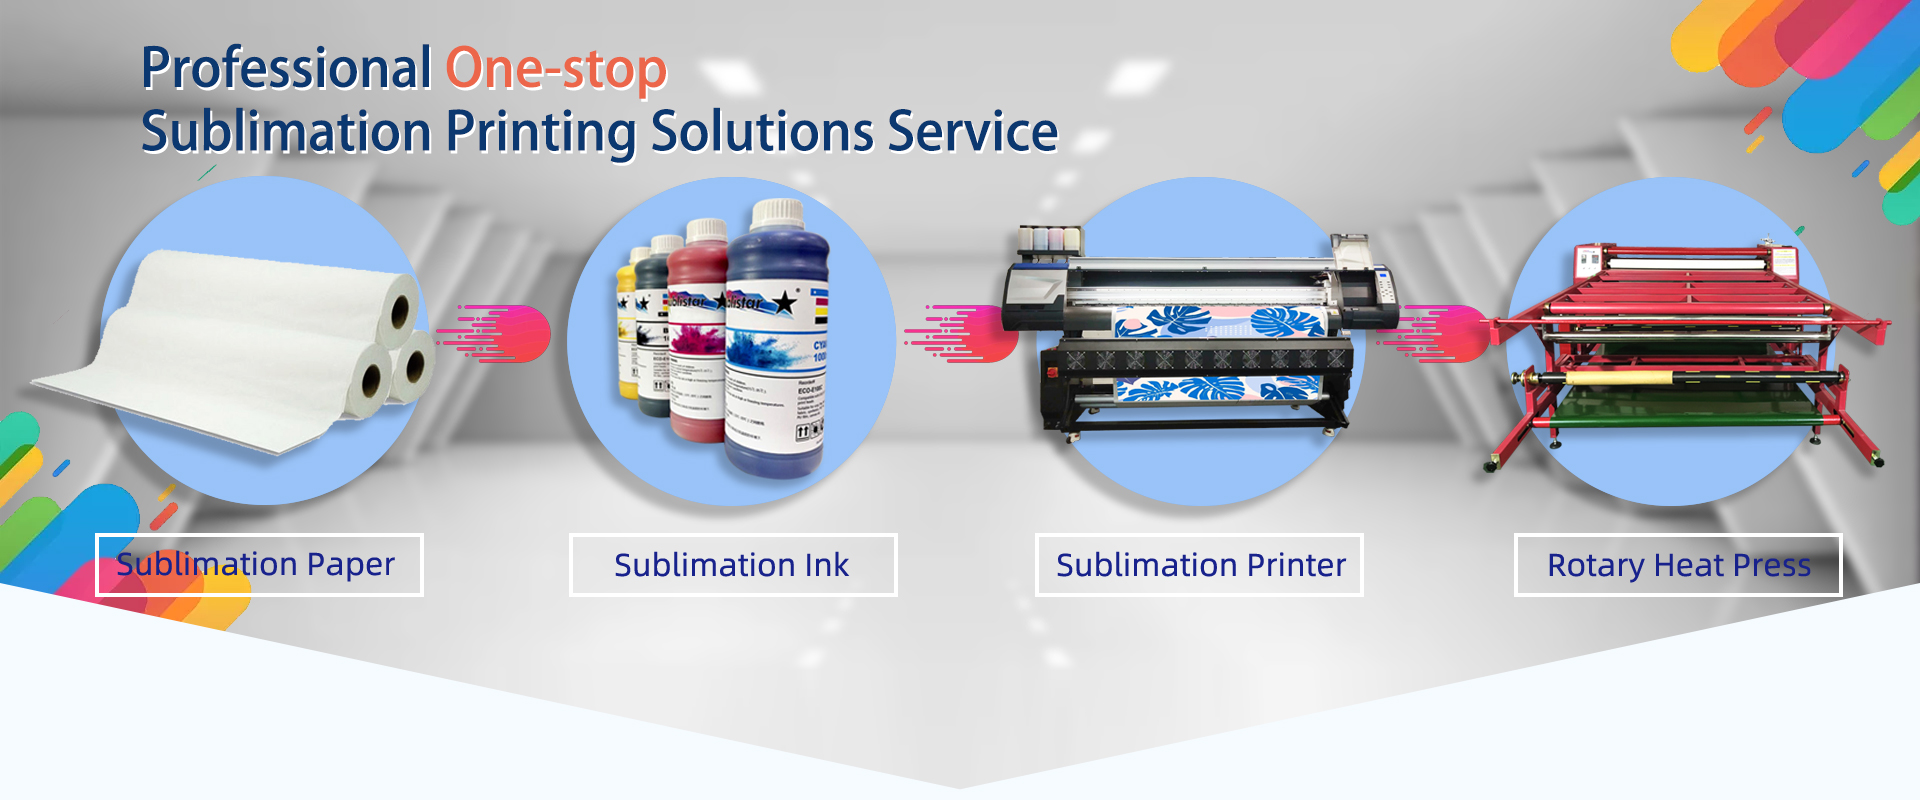 S2508 Sublimation Printer with S3200 Print heads